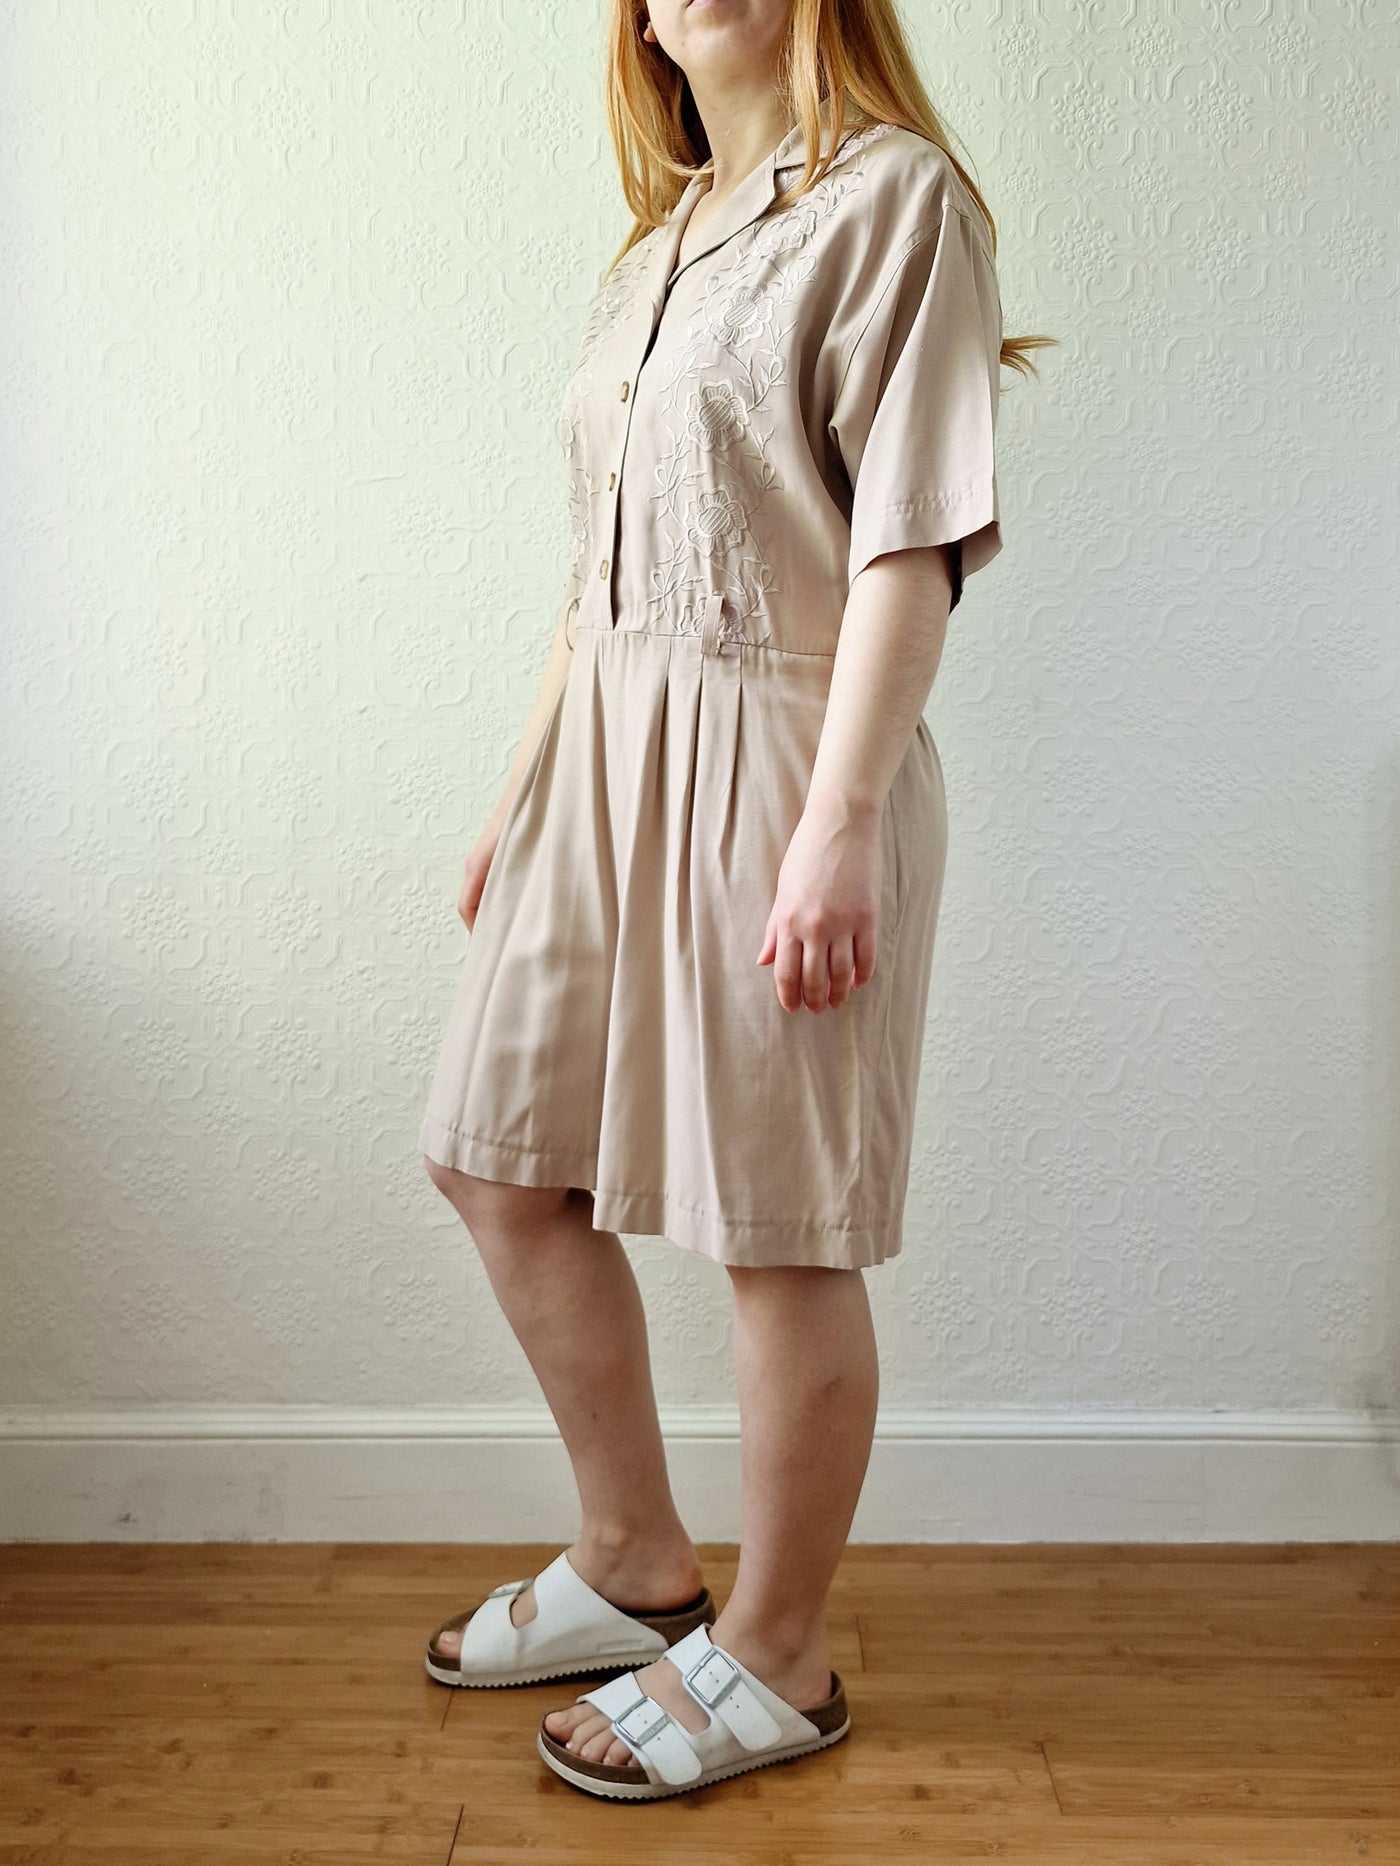 Vintage 80s Taupe Embroidered Playsuit with Short Sleeves - M